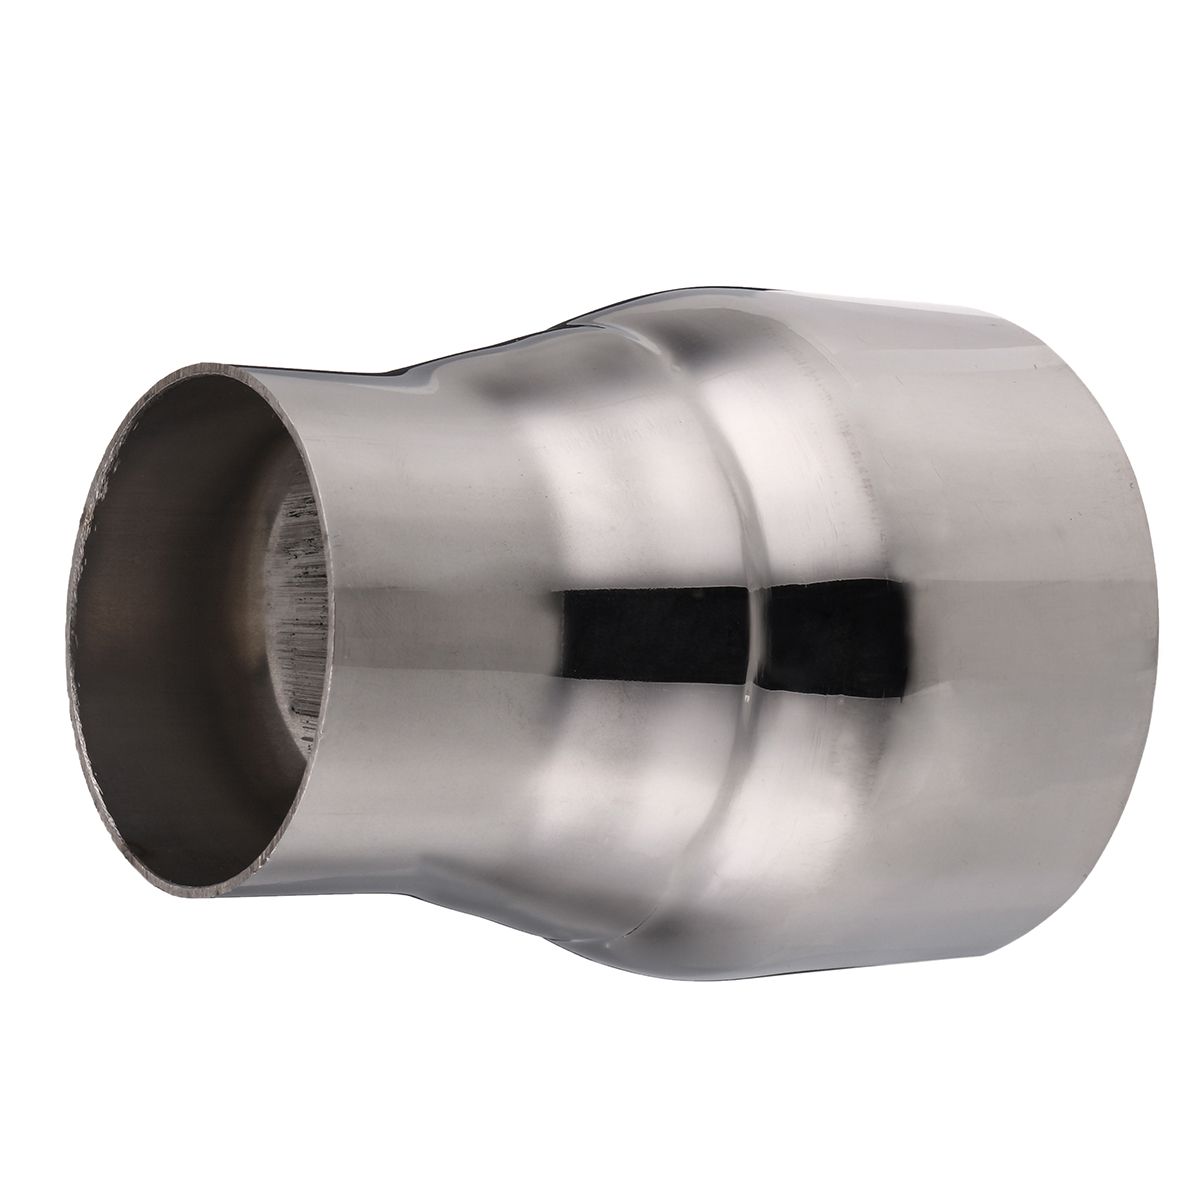 3-Inch-ID-To-2-Inch-OD-Stainless-Steel-Turbo-Exhaust-Pipe-Connector-Adapter-Reducer-Tube-1261665